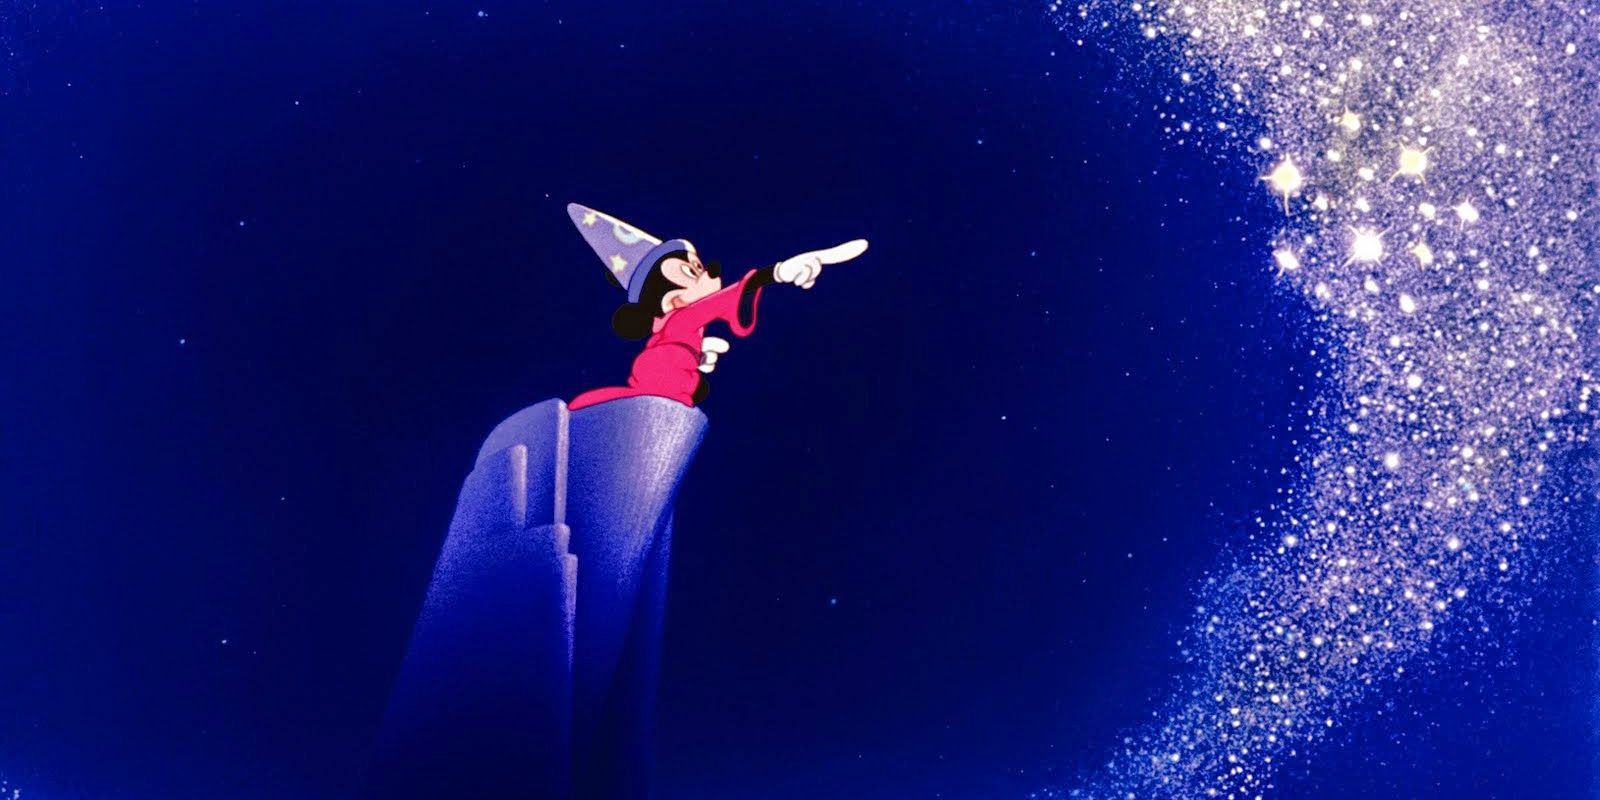 Disney 10 Films More Relevant Today Than When They Were Released